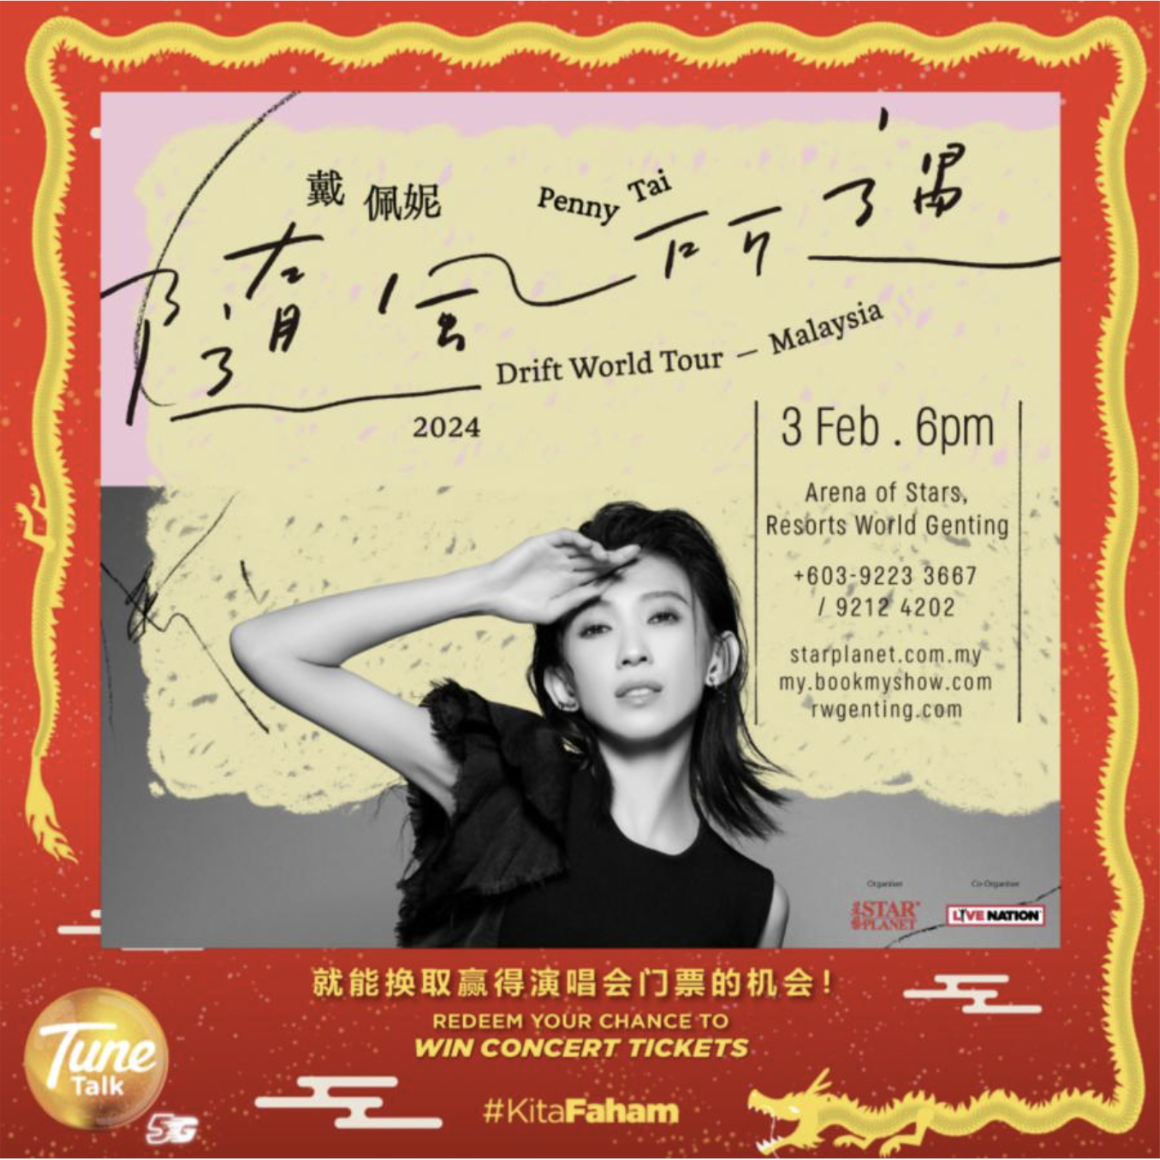 Penny tai concert poster